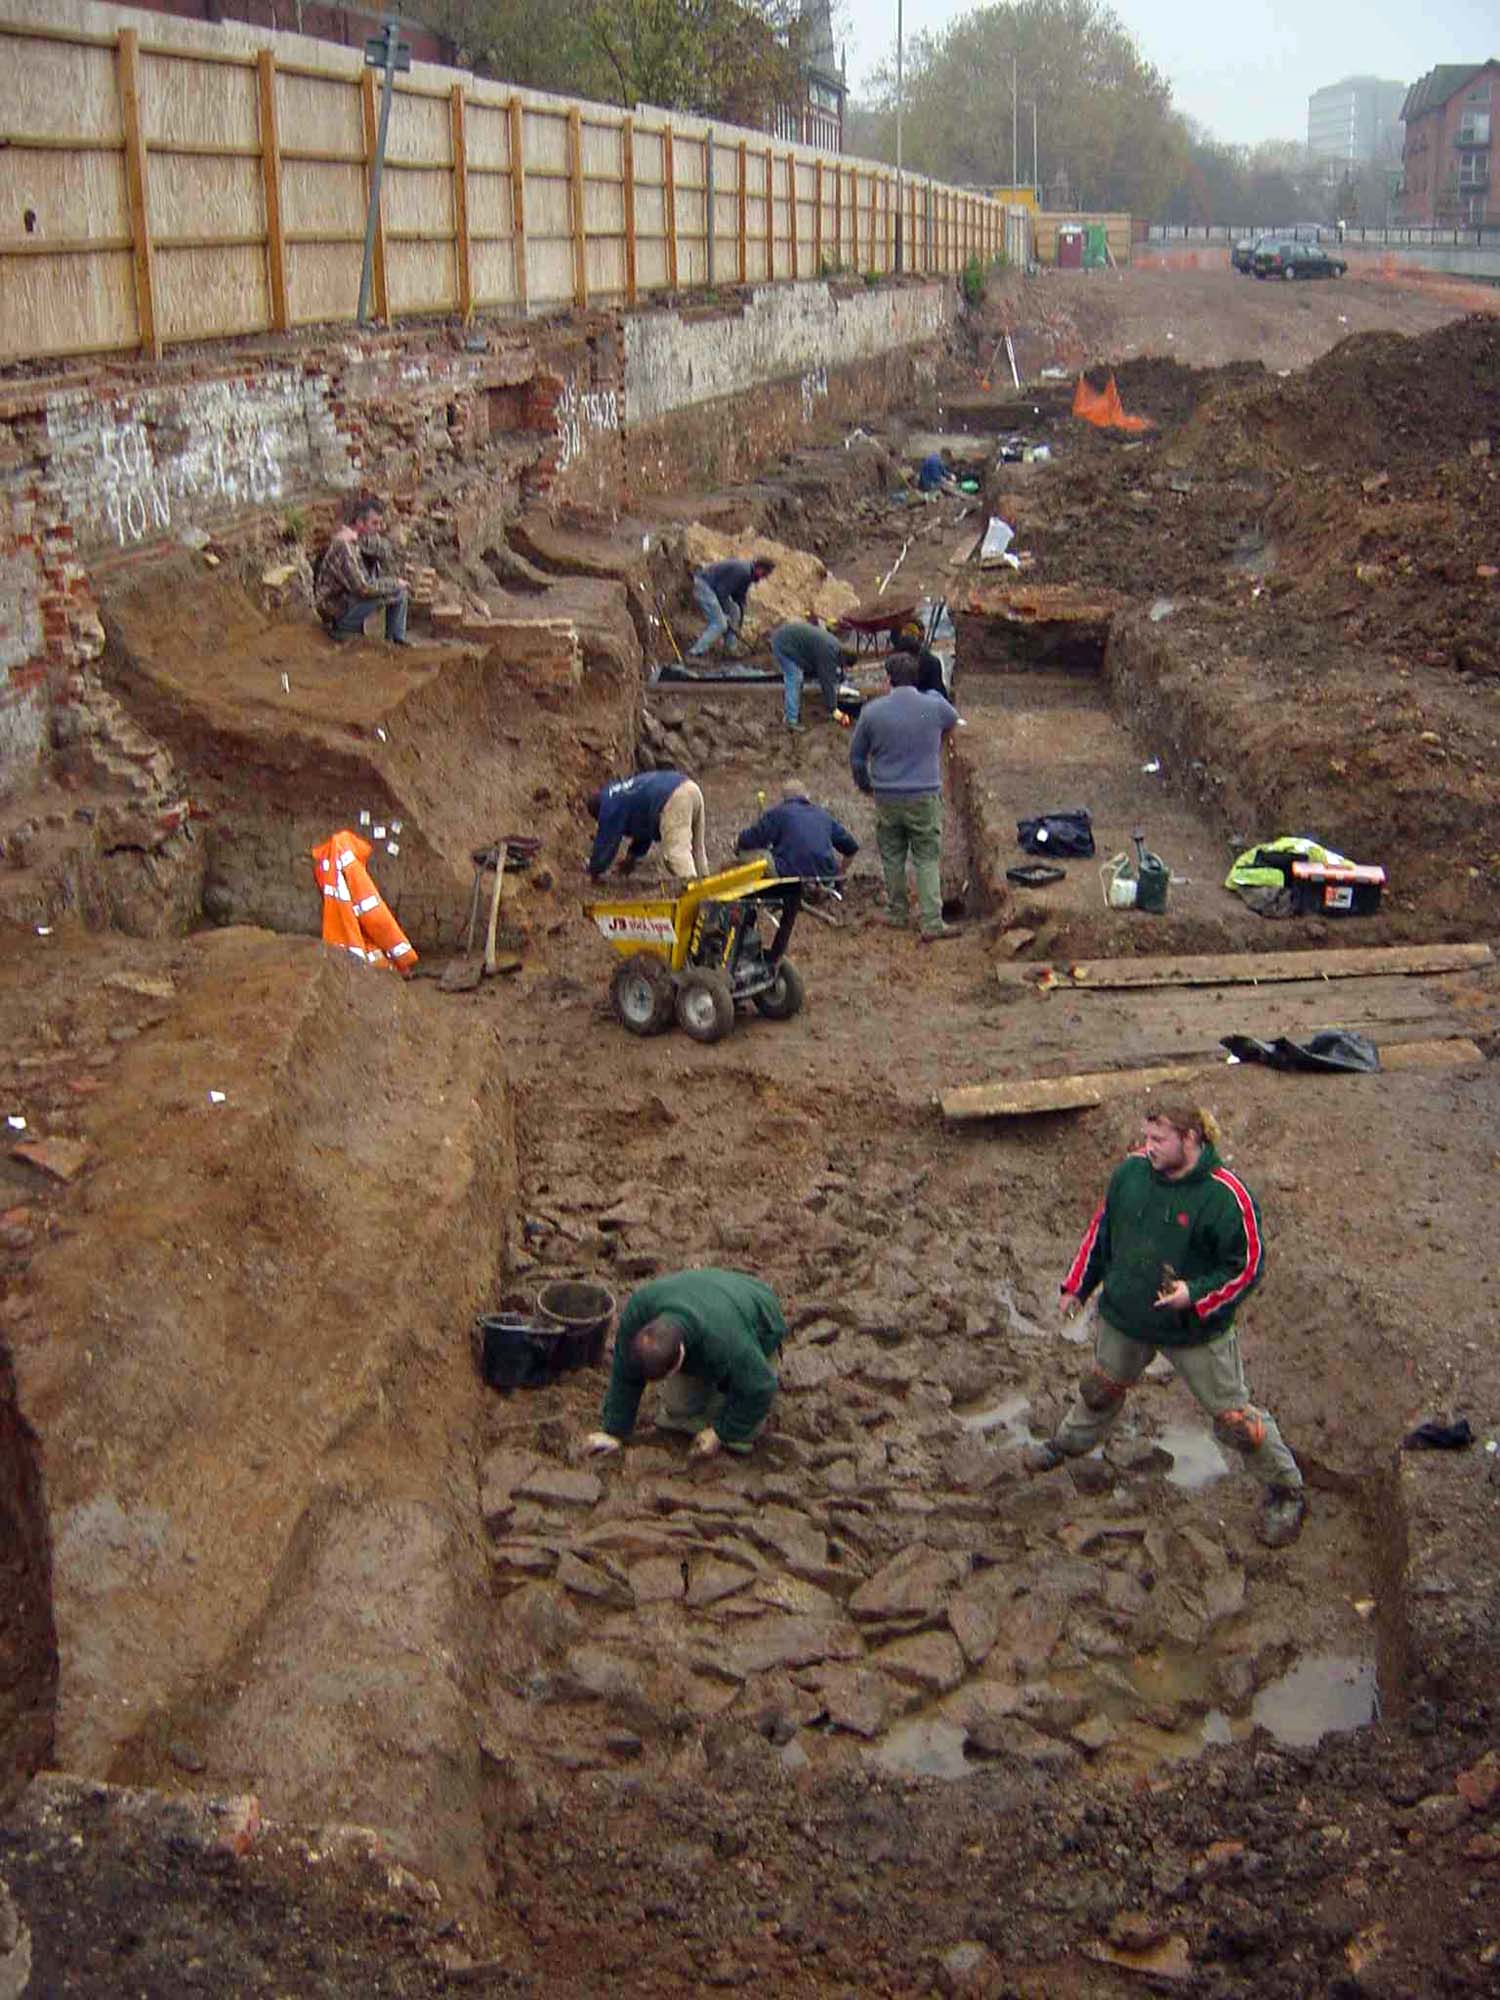 Archaeologists excavate a length of the medieval town defences on Bath Lane. Fallen masonry next to the wall and areas of scorched foundation were probably evidence of the 1173 siege - University of Leicester Archaeological Services